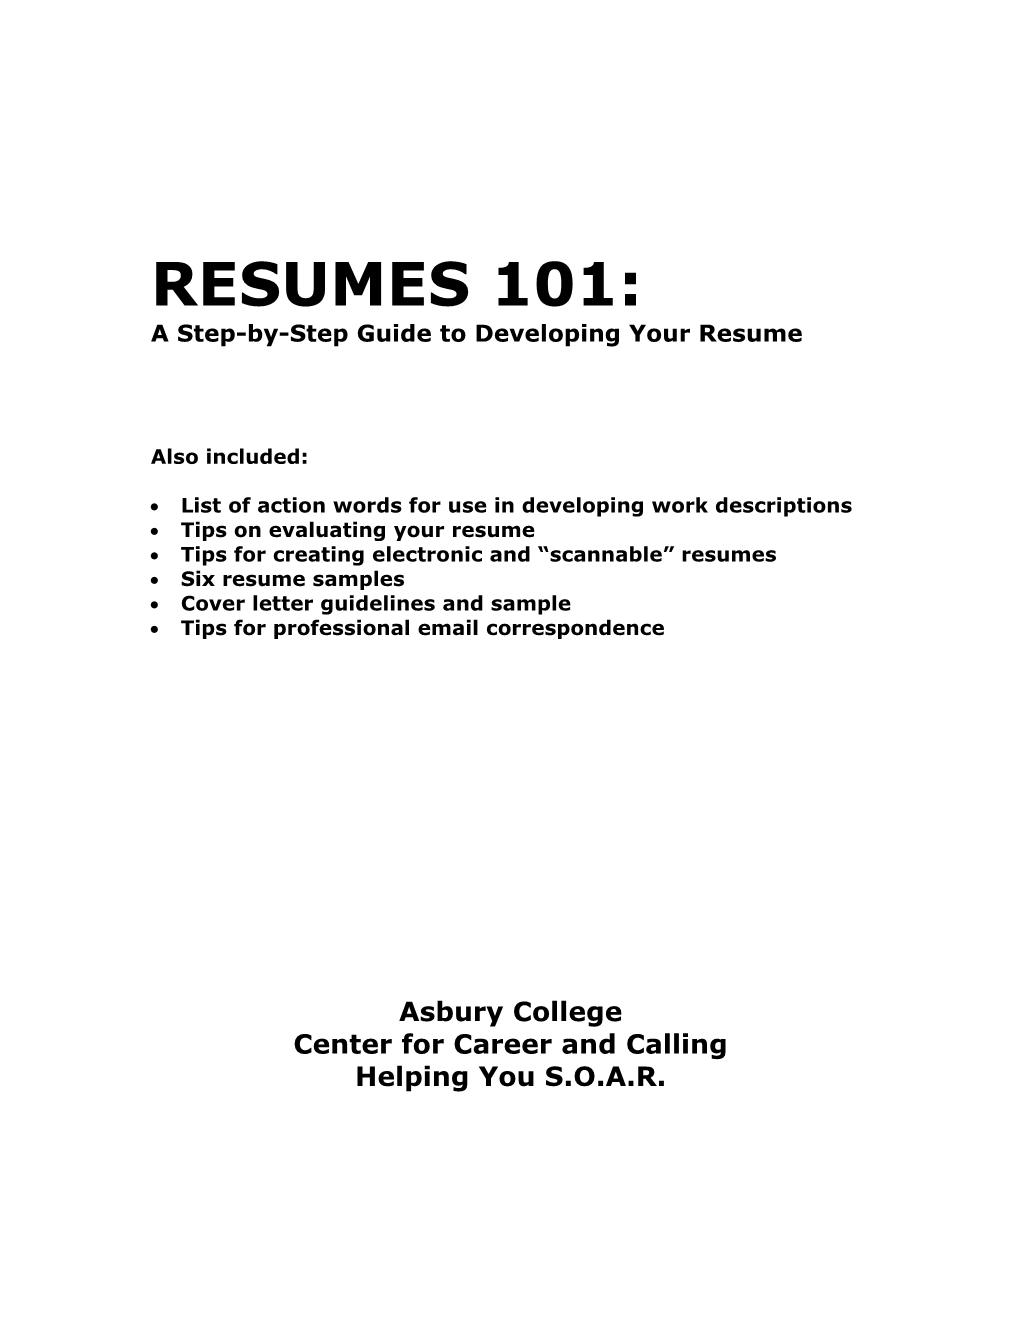 What Is a Resume